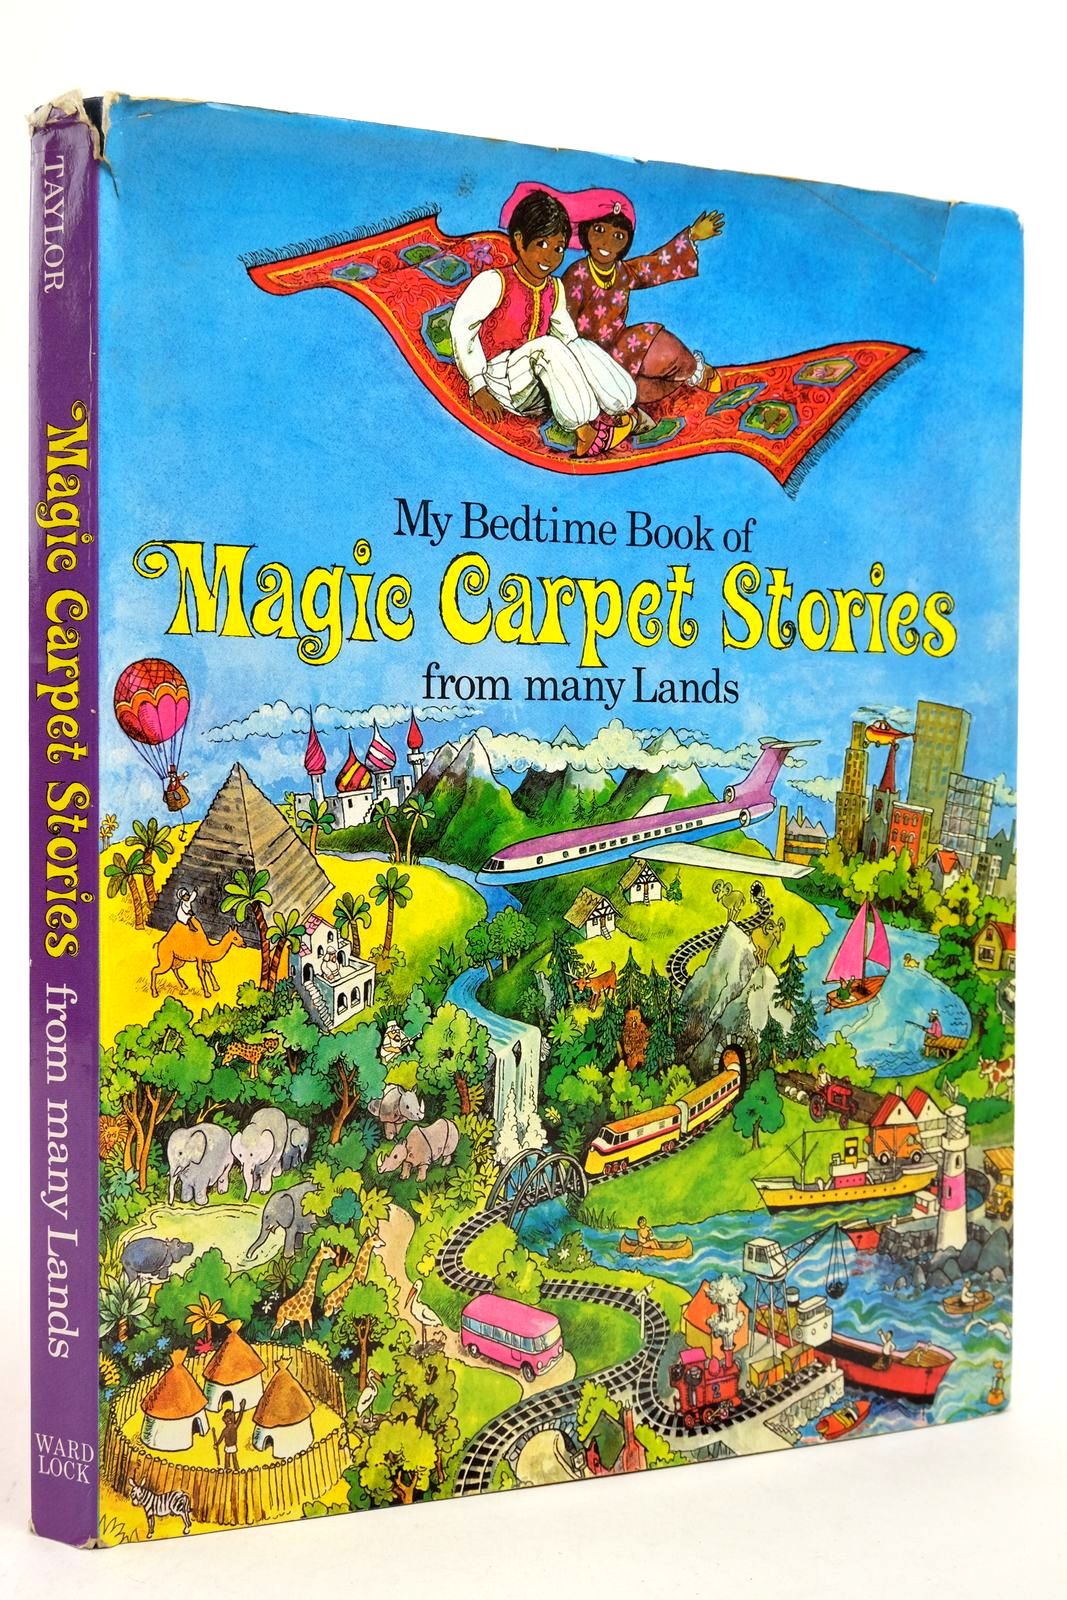 Photo of MY BEDTIME BOOK OF MAGIC CARPET STORIES FROM MANY LANDS written by Taylor, Patricia illustrated by Escott, Tony Kailer, Claude Lowndes, Rosemary published by Ward Lock Limited (STOCK CODE: 2140261)  for sale by Stella & Rose's Books